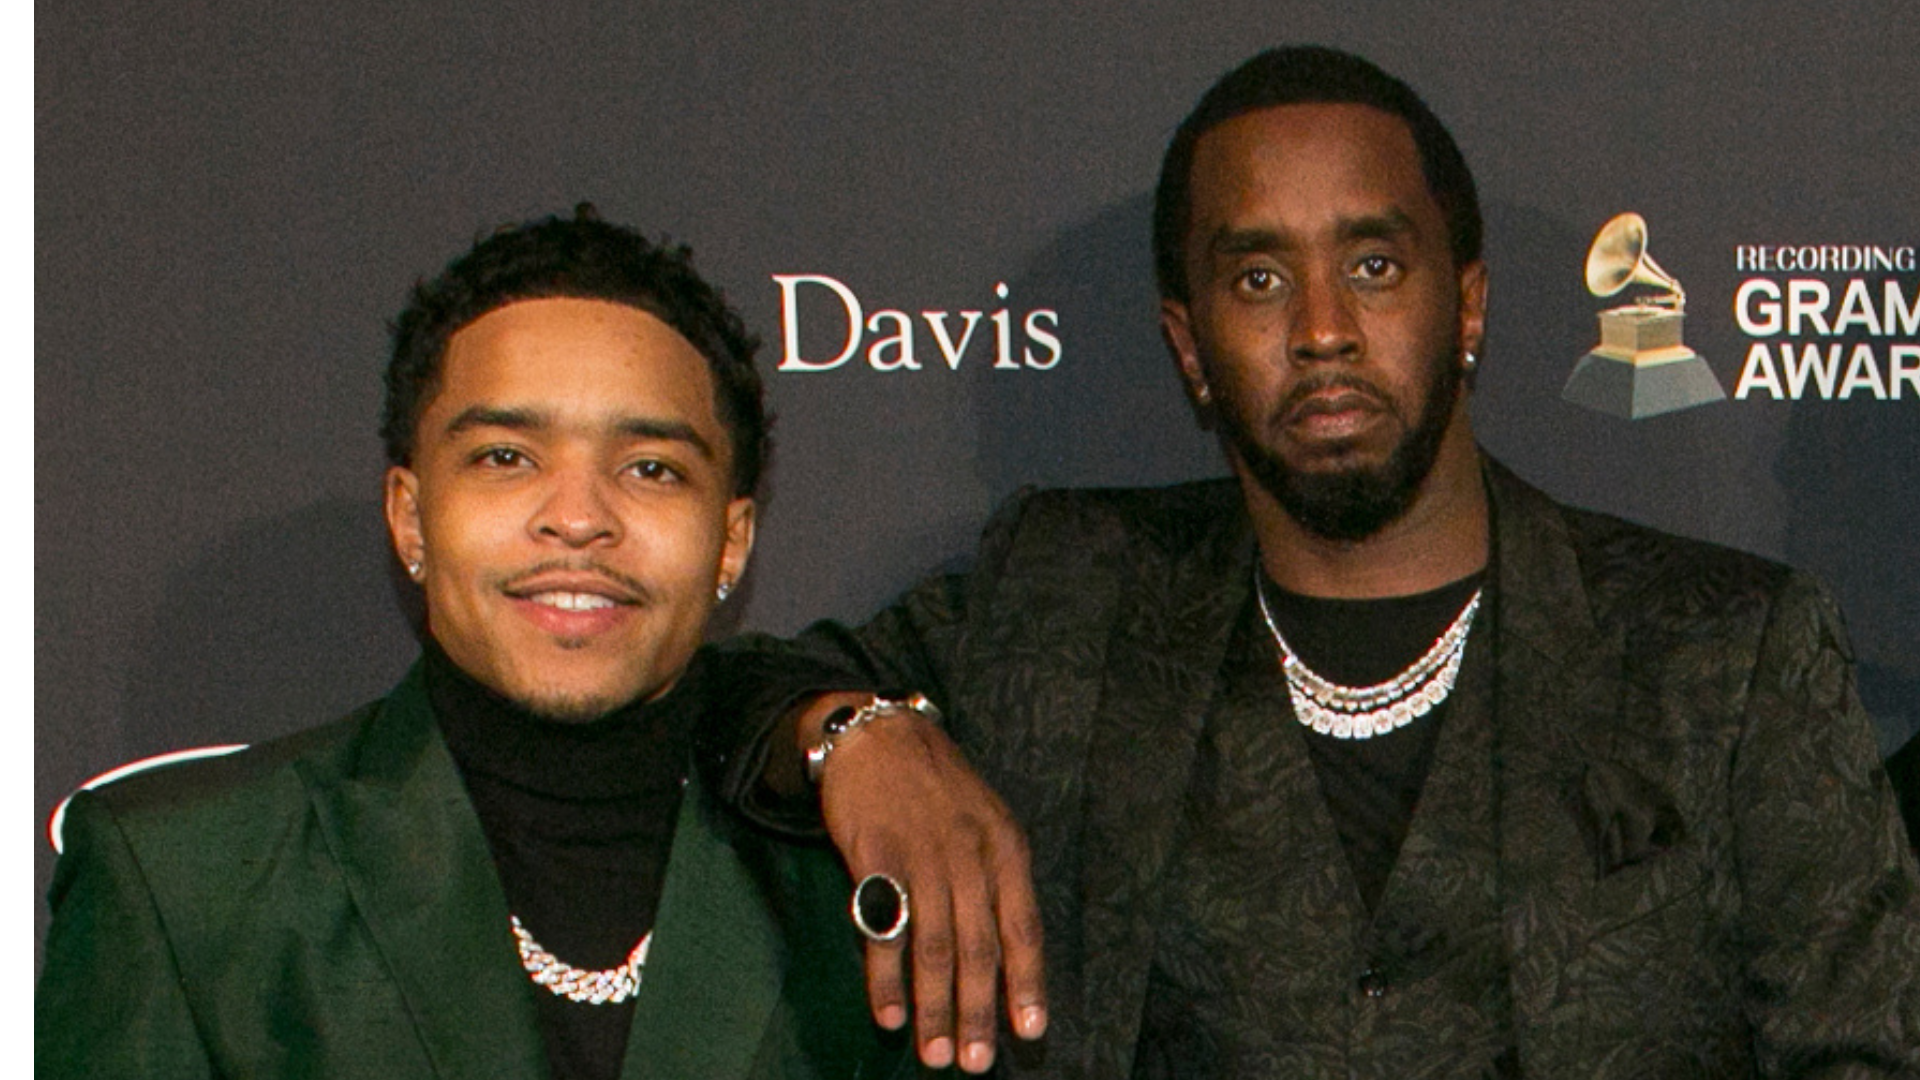 Diddy’s son, Justin Combs, arrested for DUI